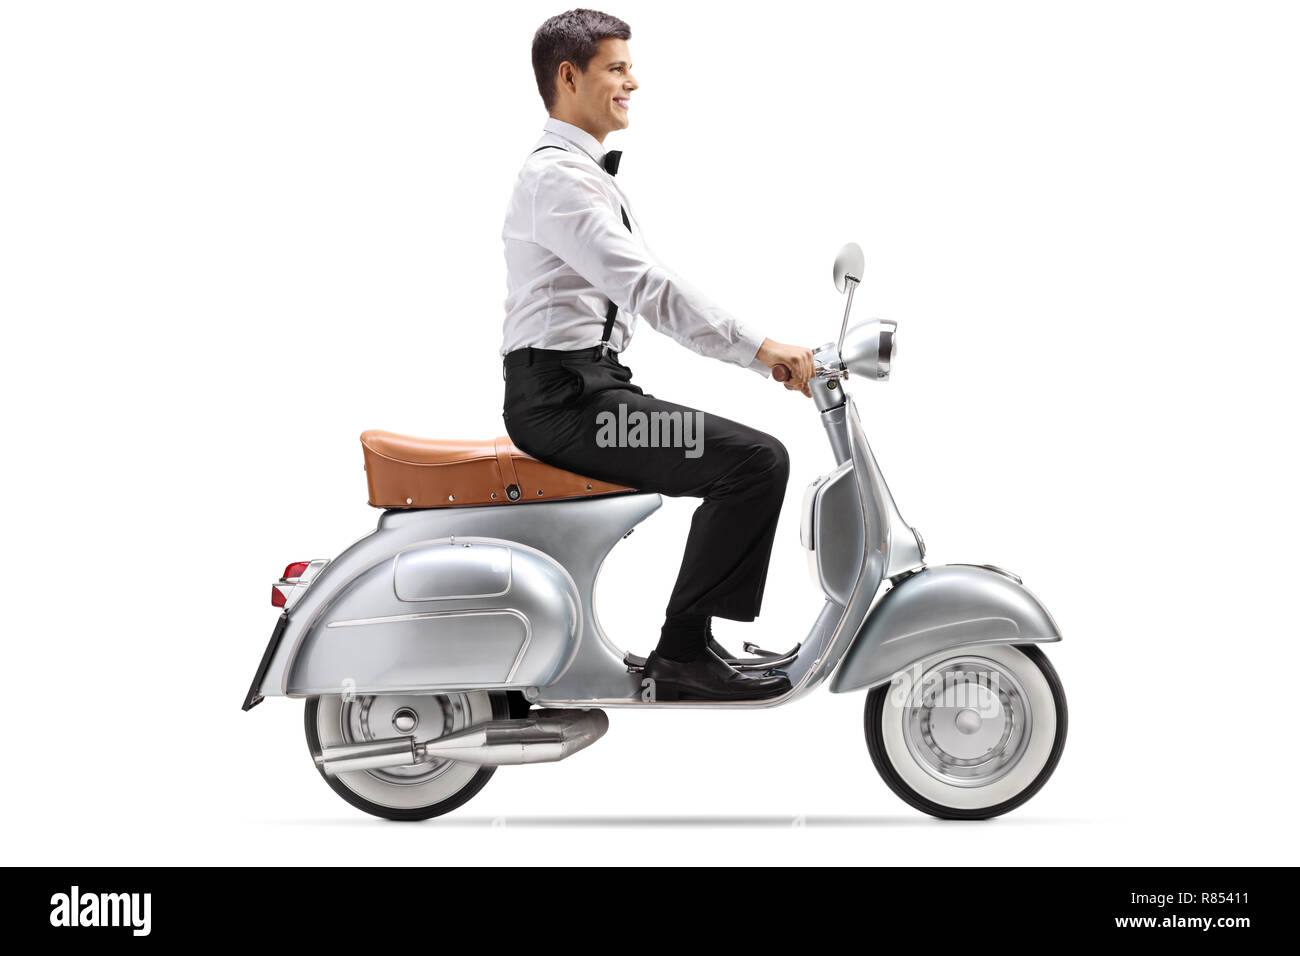 Full length shot of a young man in smart clothes riding a vintage scooter isolated on white background Stock Photo